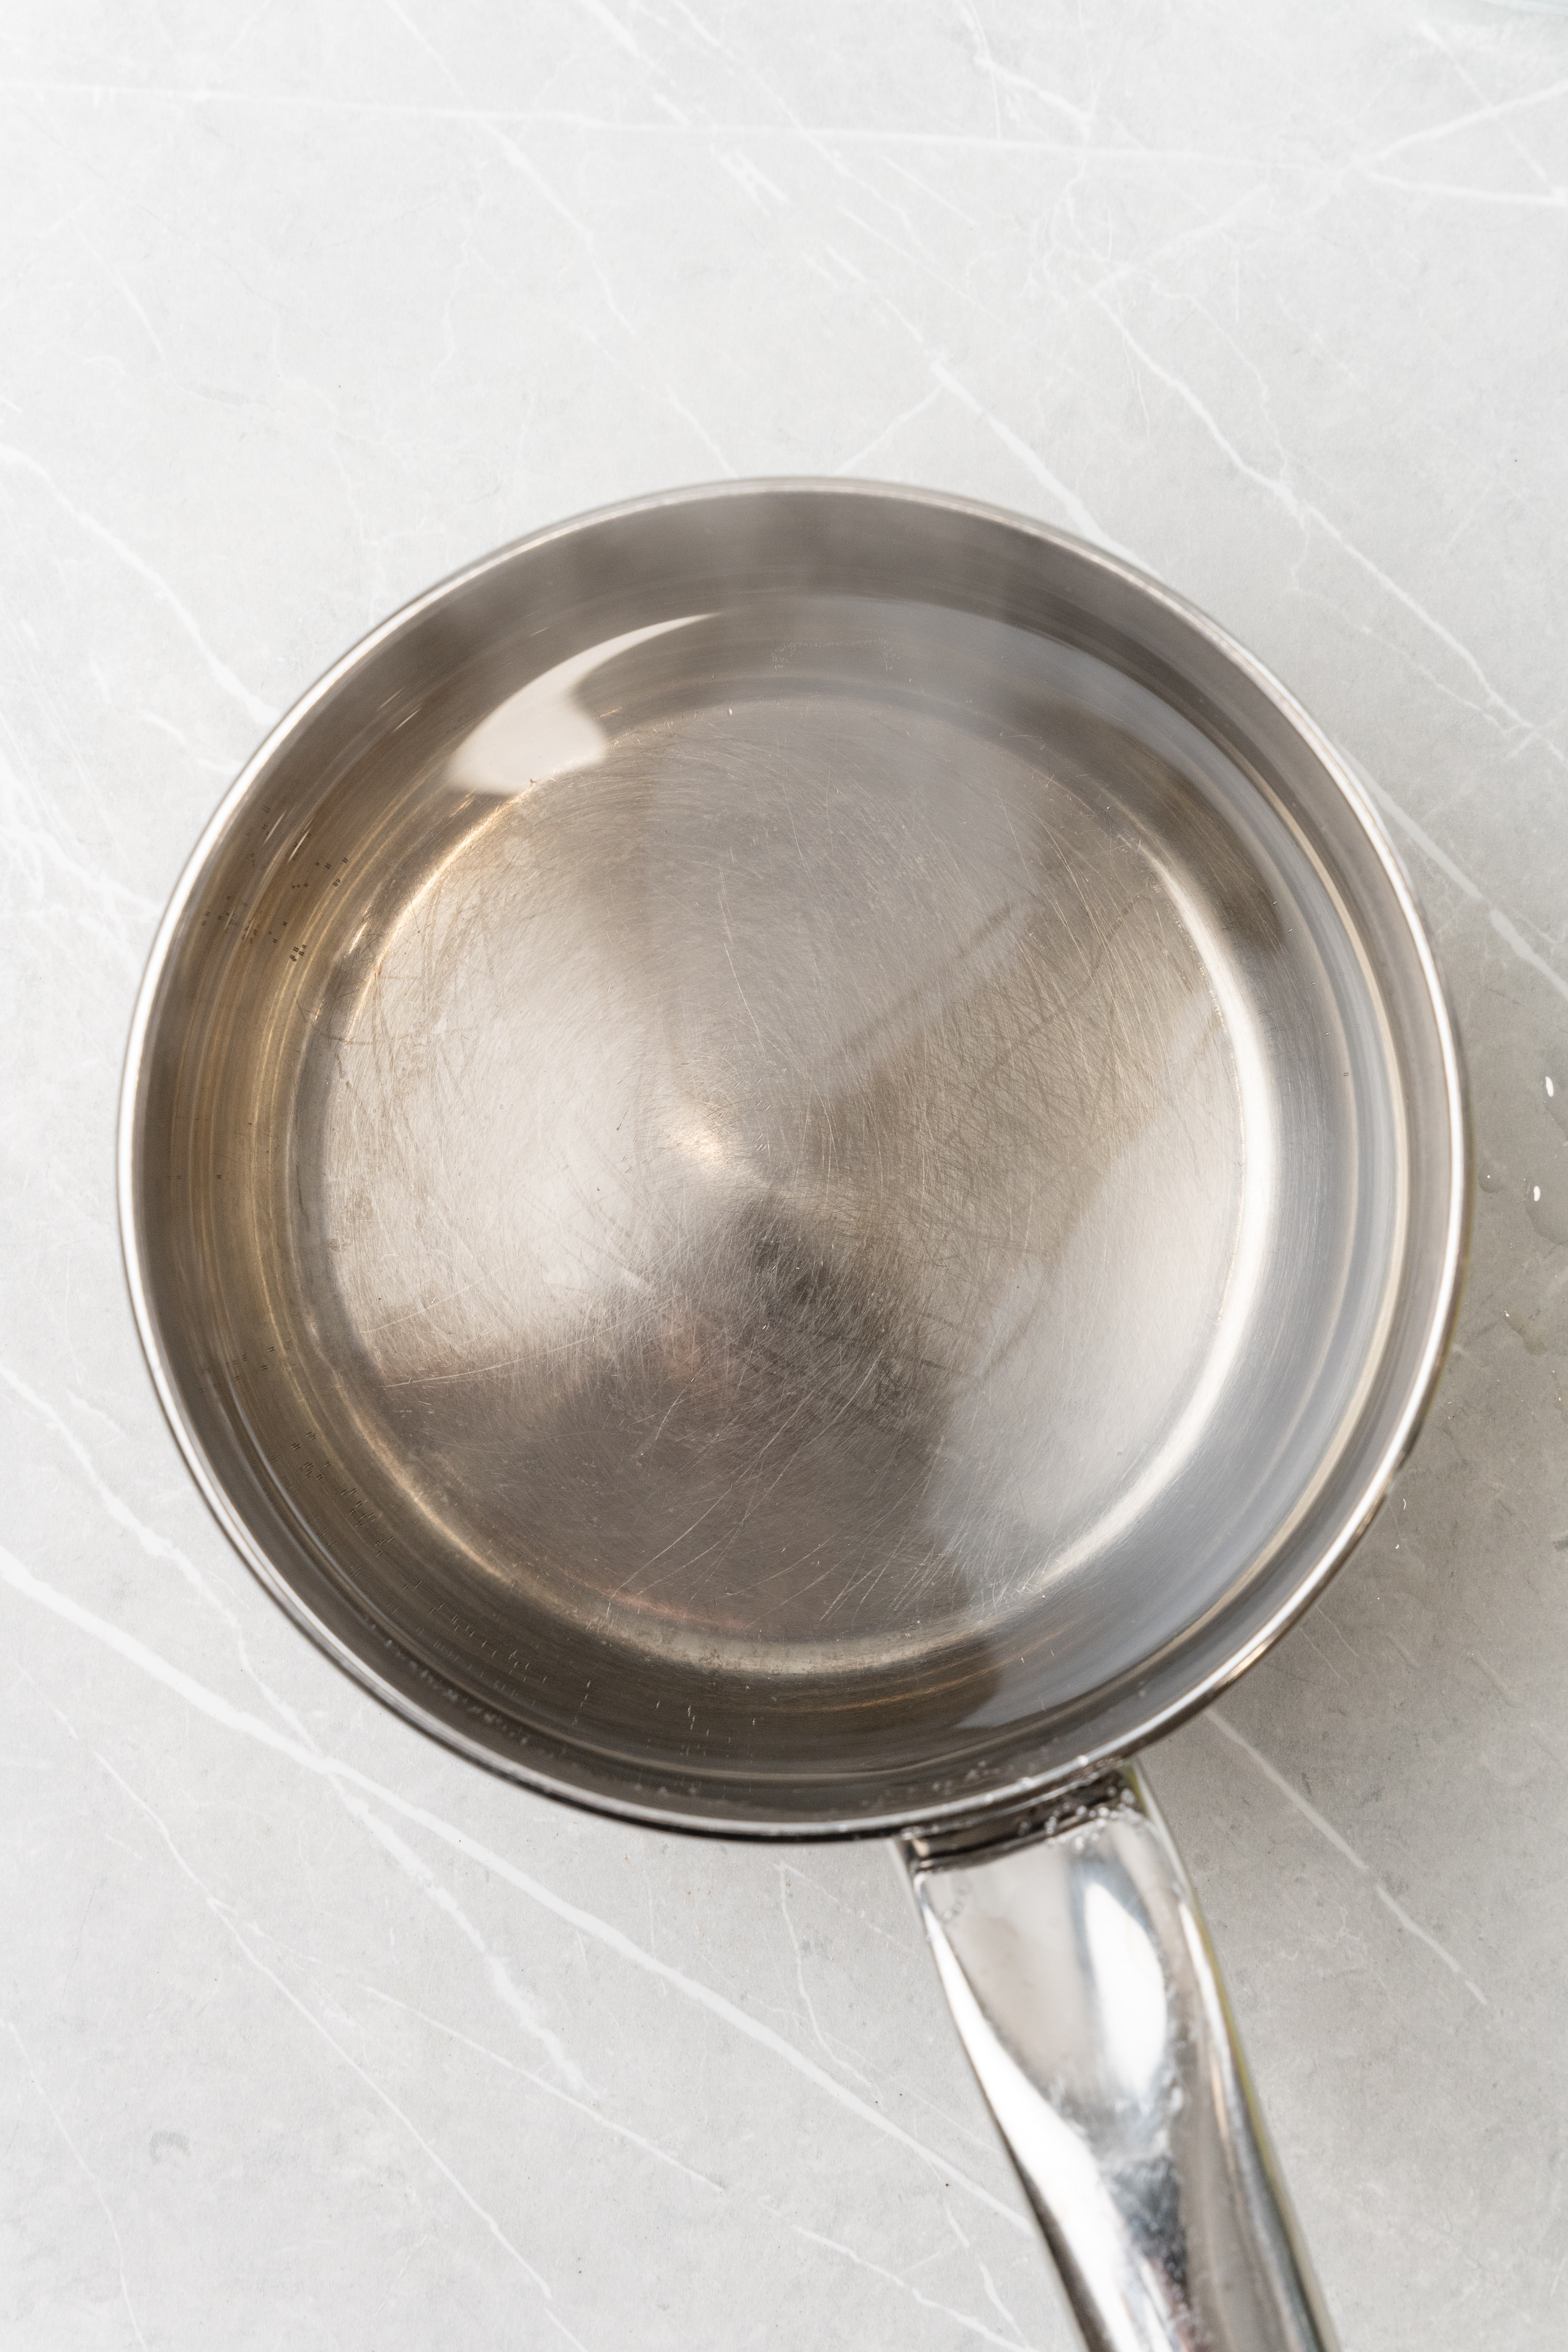 simple syrup in a small metal sauce pan